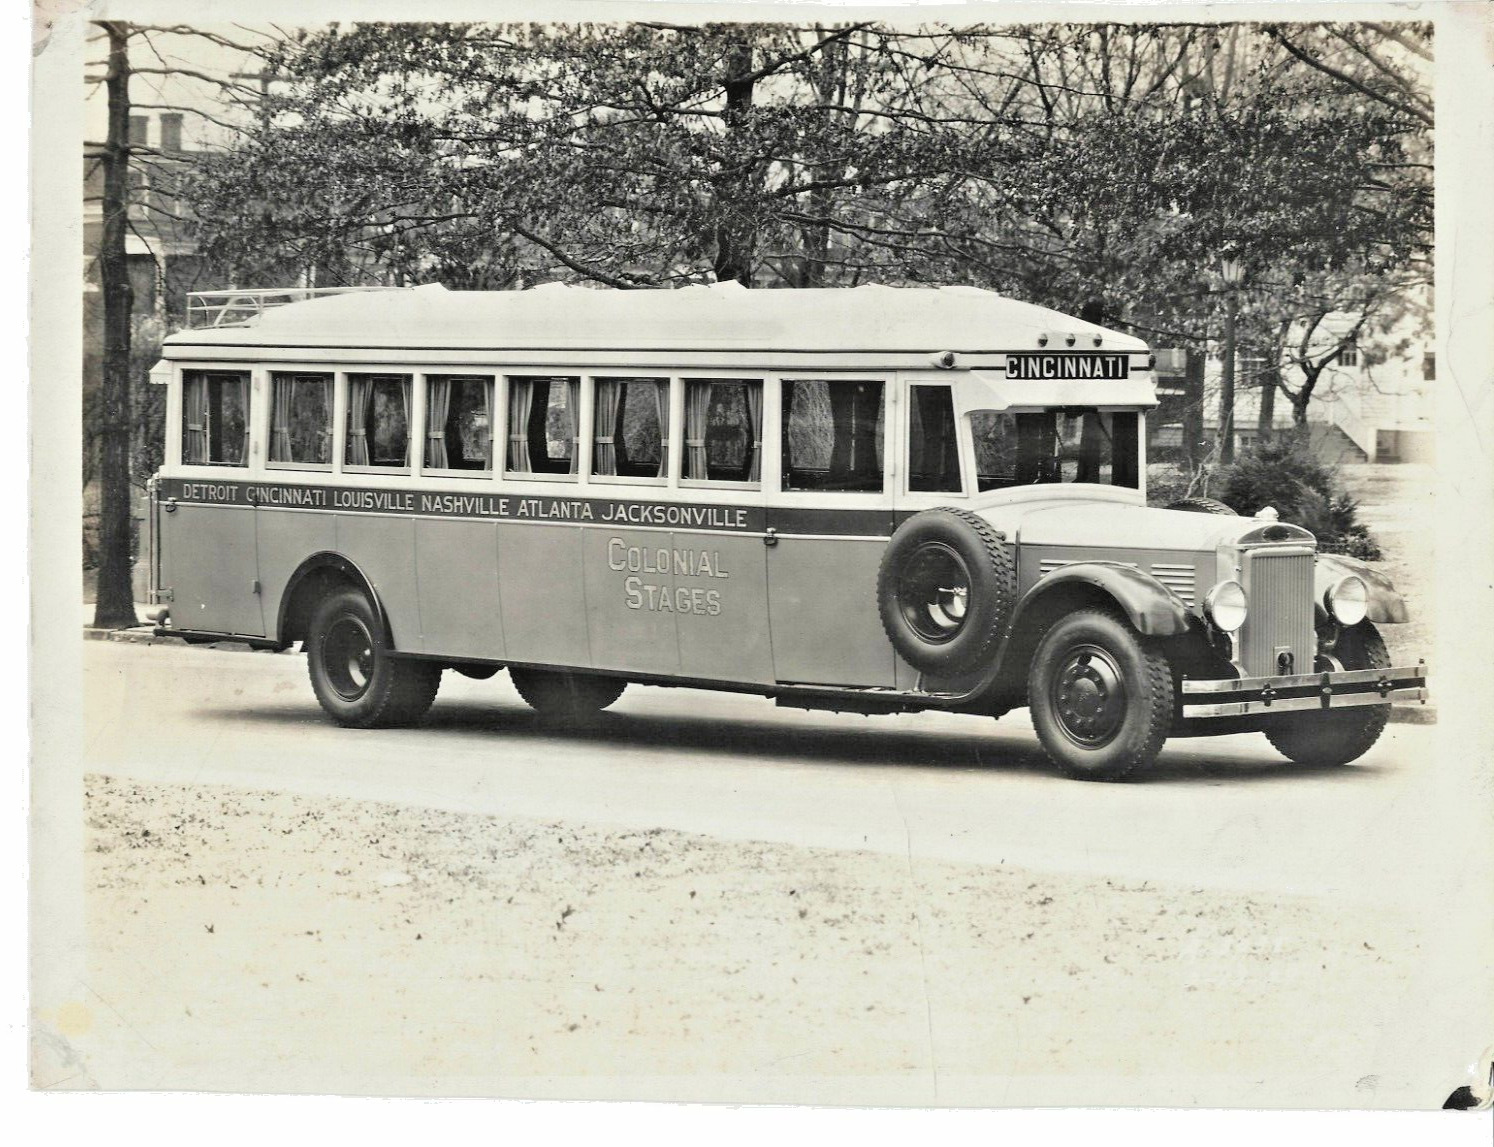 vintage 1930's Colonial Stages Bus bound for Cincinnati - B&W 8x10 photo